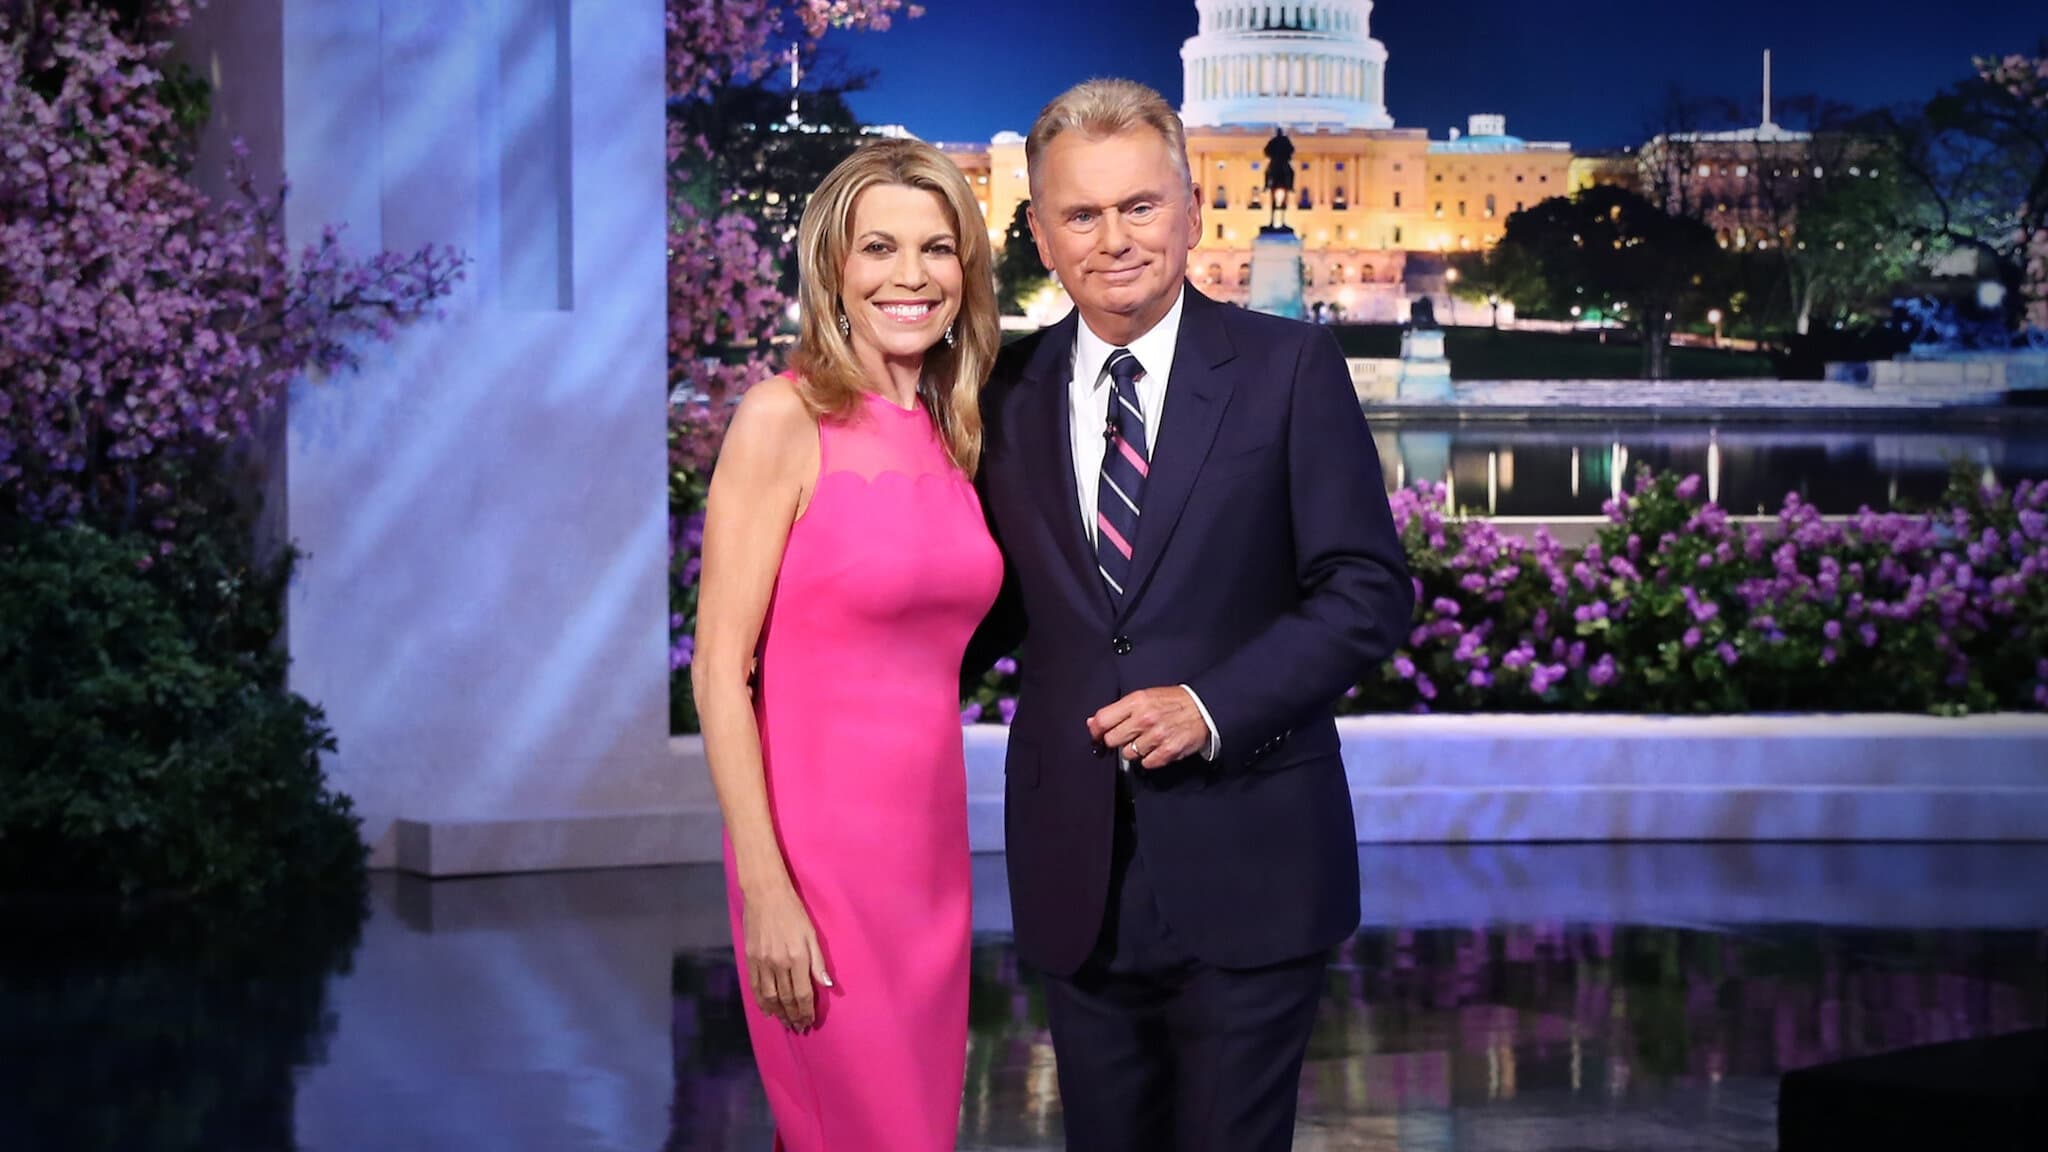 Wheel of Fortune - Season 33 Episode 7 : Home Sweet Home 2